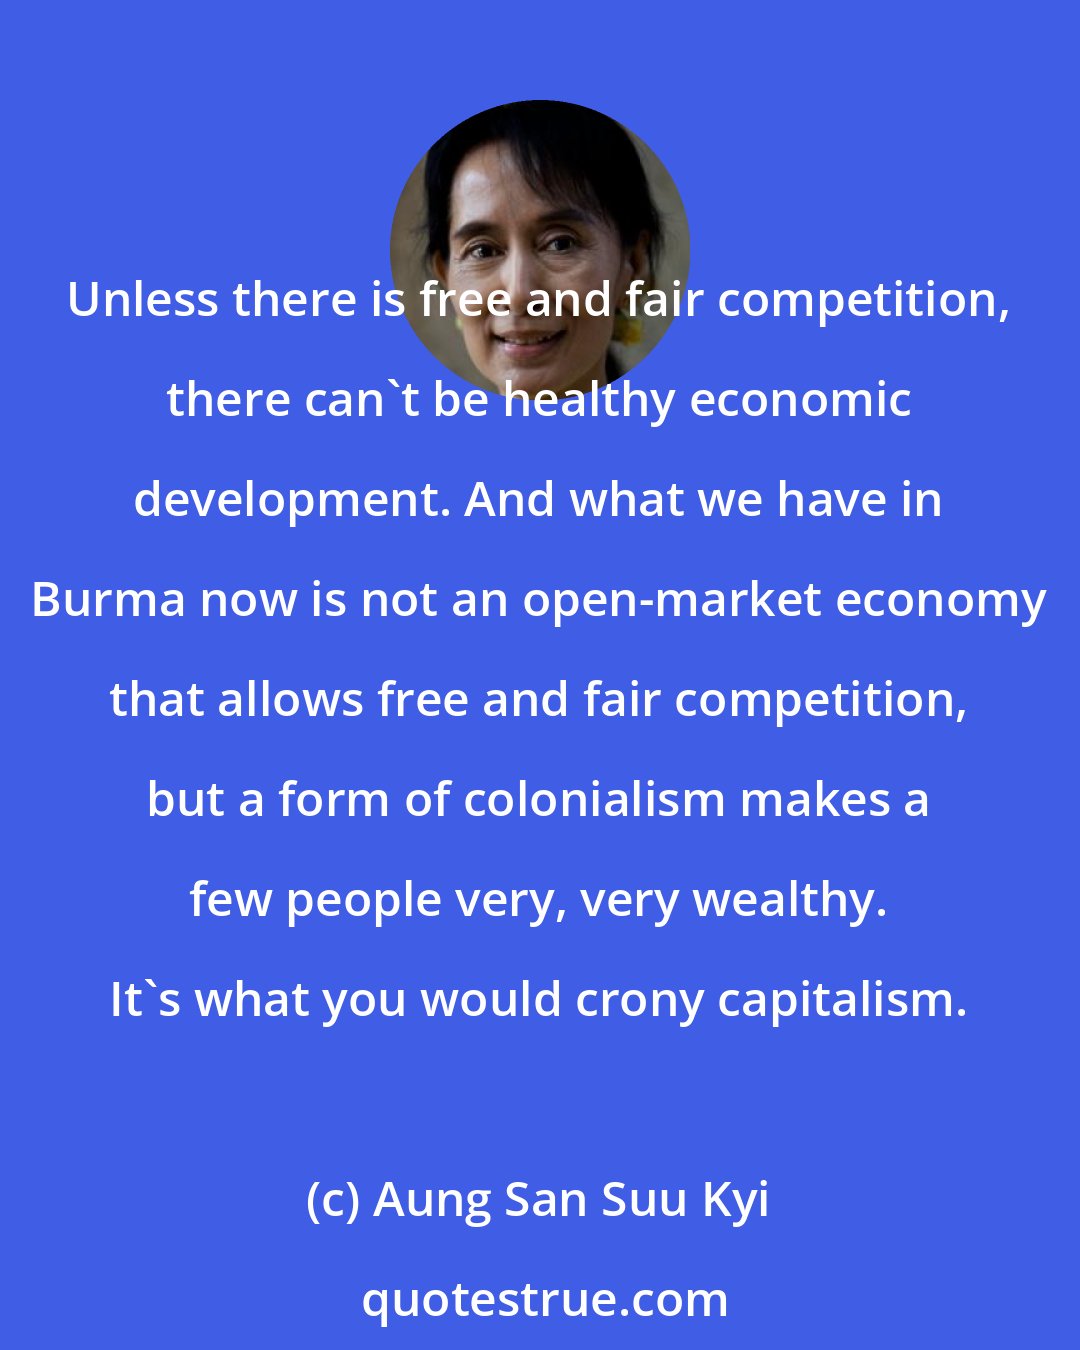 Aung San Suu Kyi: Unless there is free and fair competition, there can't be healthy economic development. And what we have in Burma now is not an open-market economy that allows free and fair competition, but a form of colonialism makes a few people very, very wealthy. It's what you would crony capitalism.